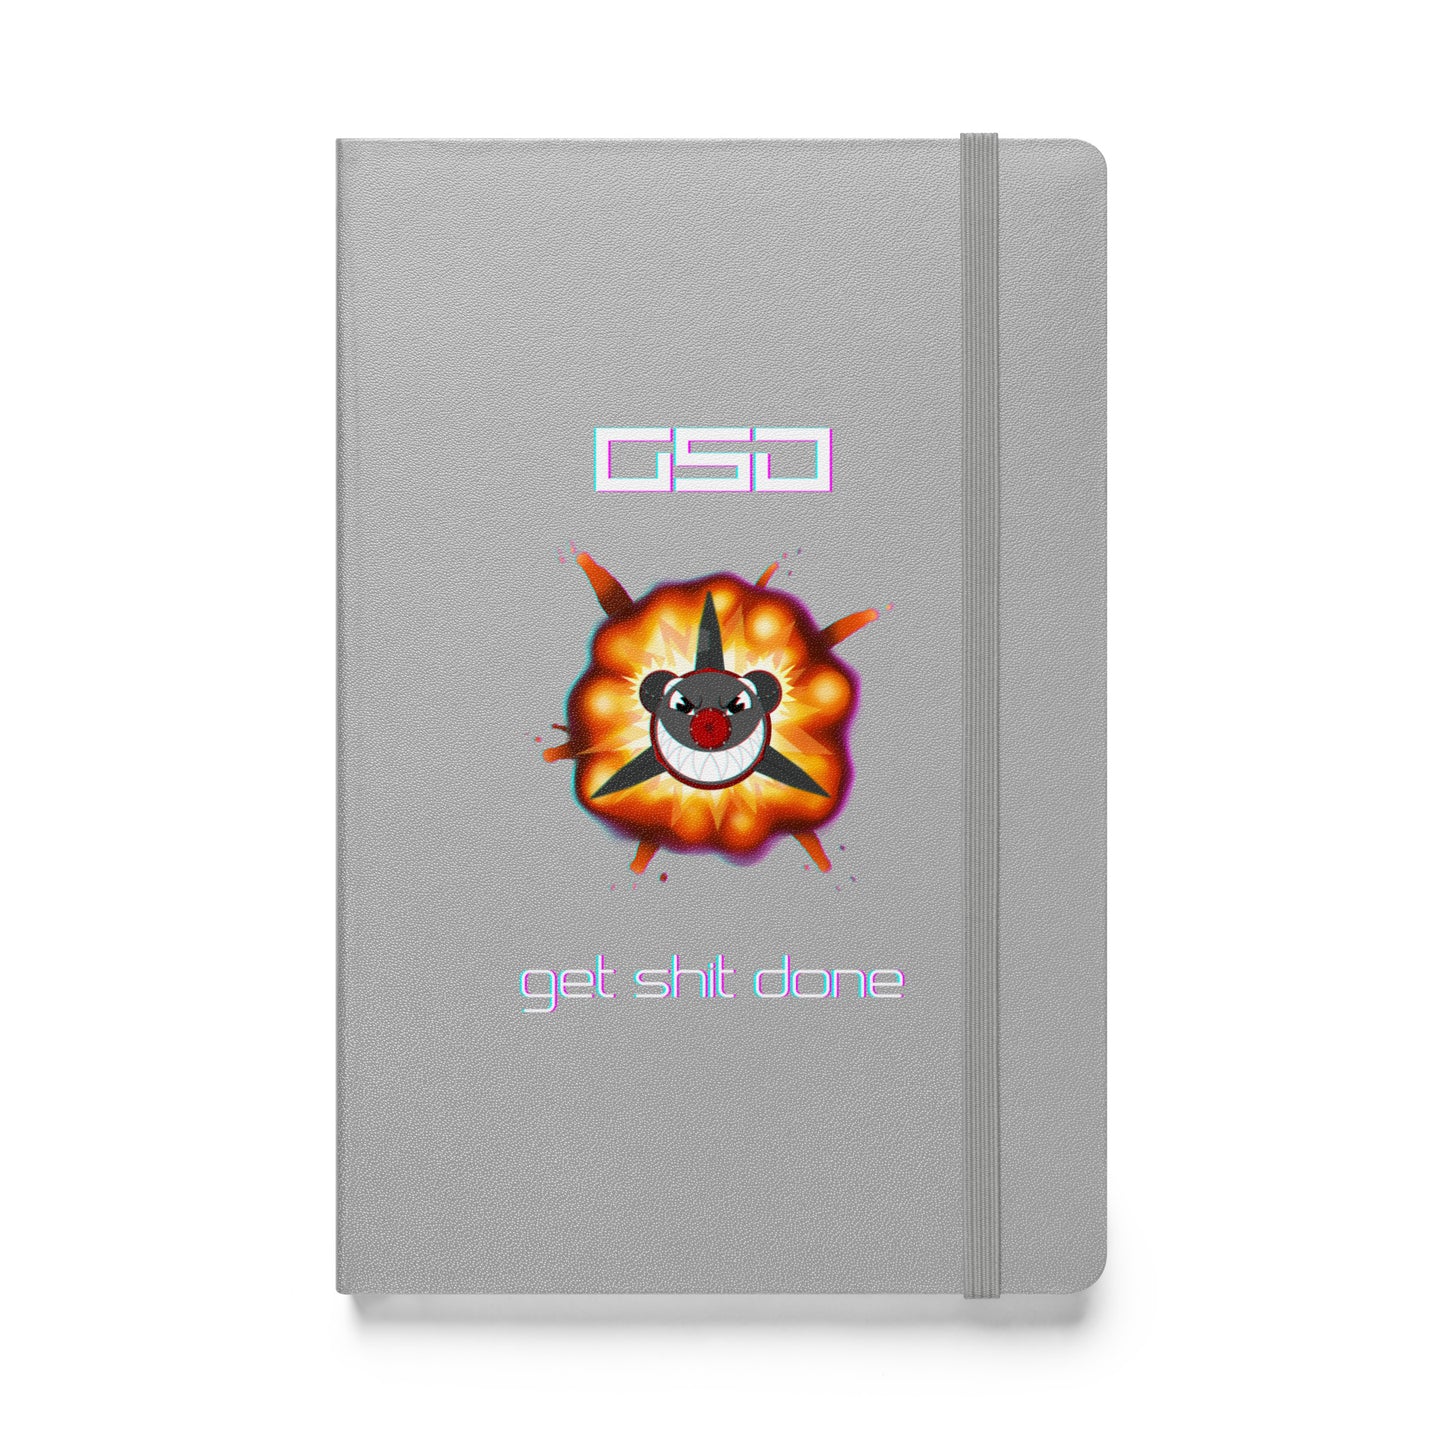 Rocket -Classic GSD- Hardcover bound notebook